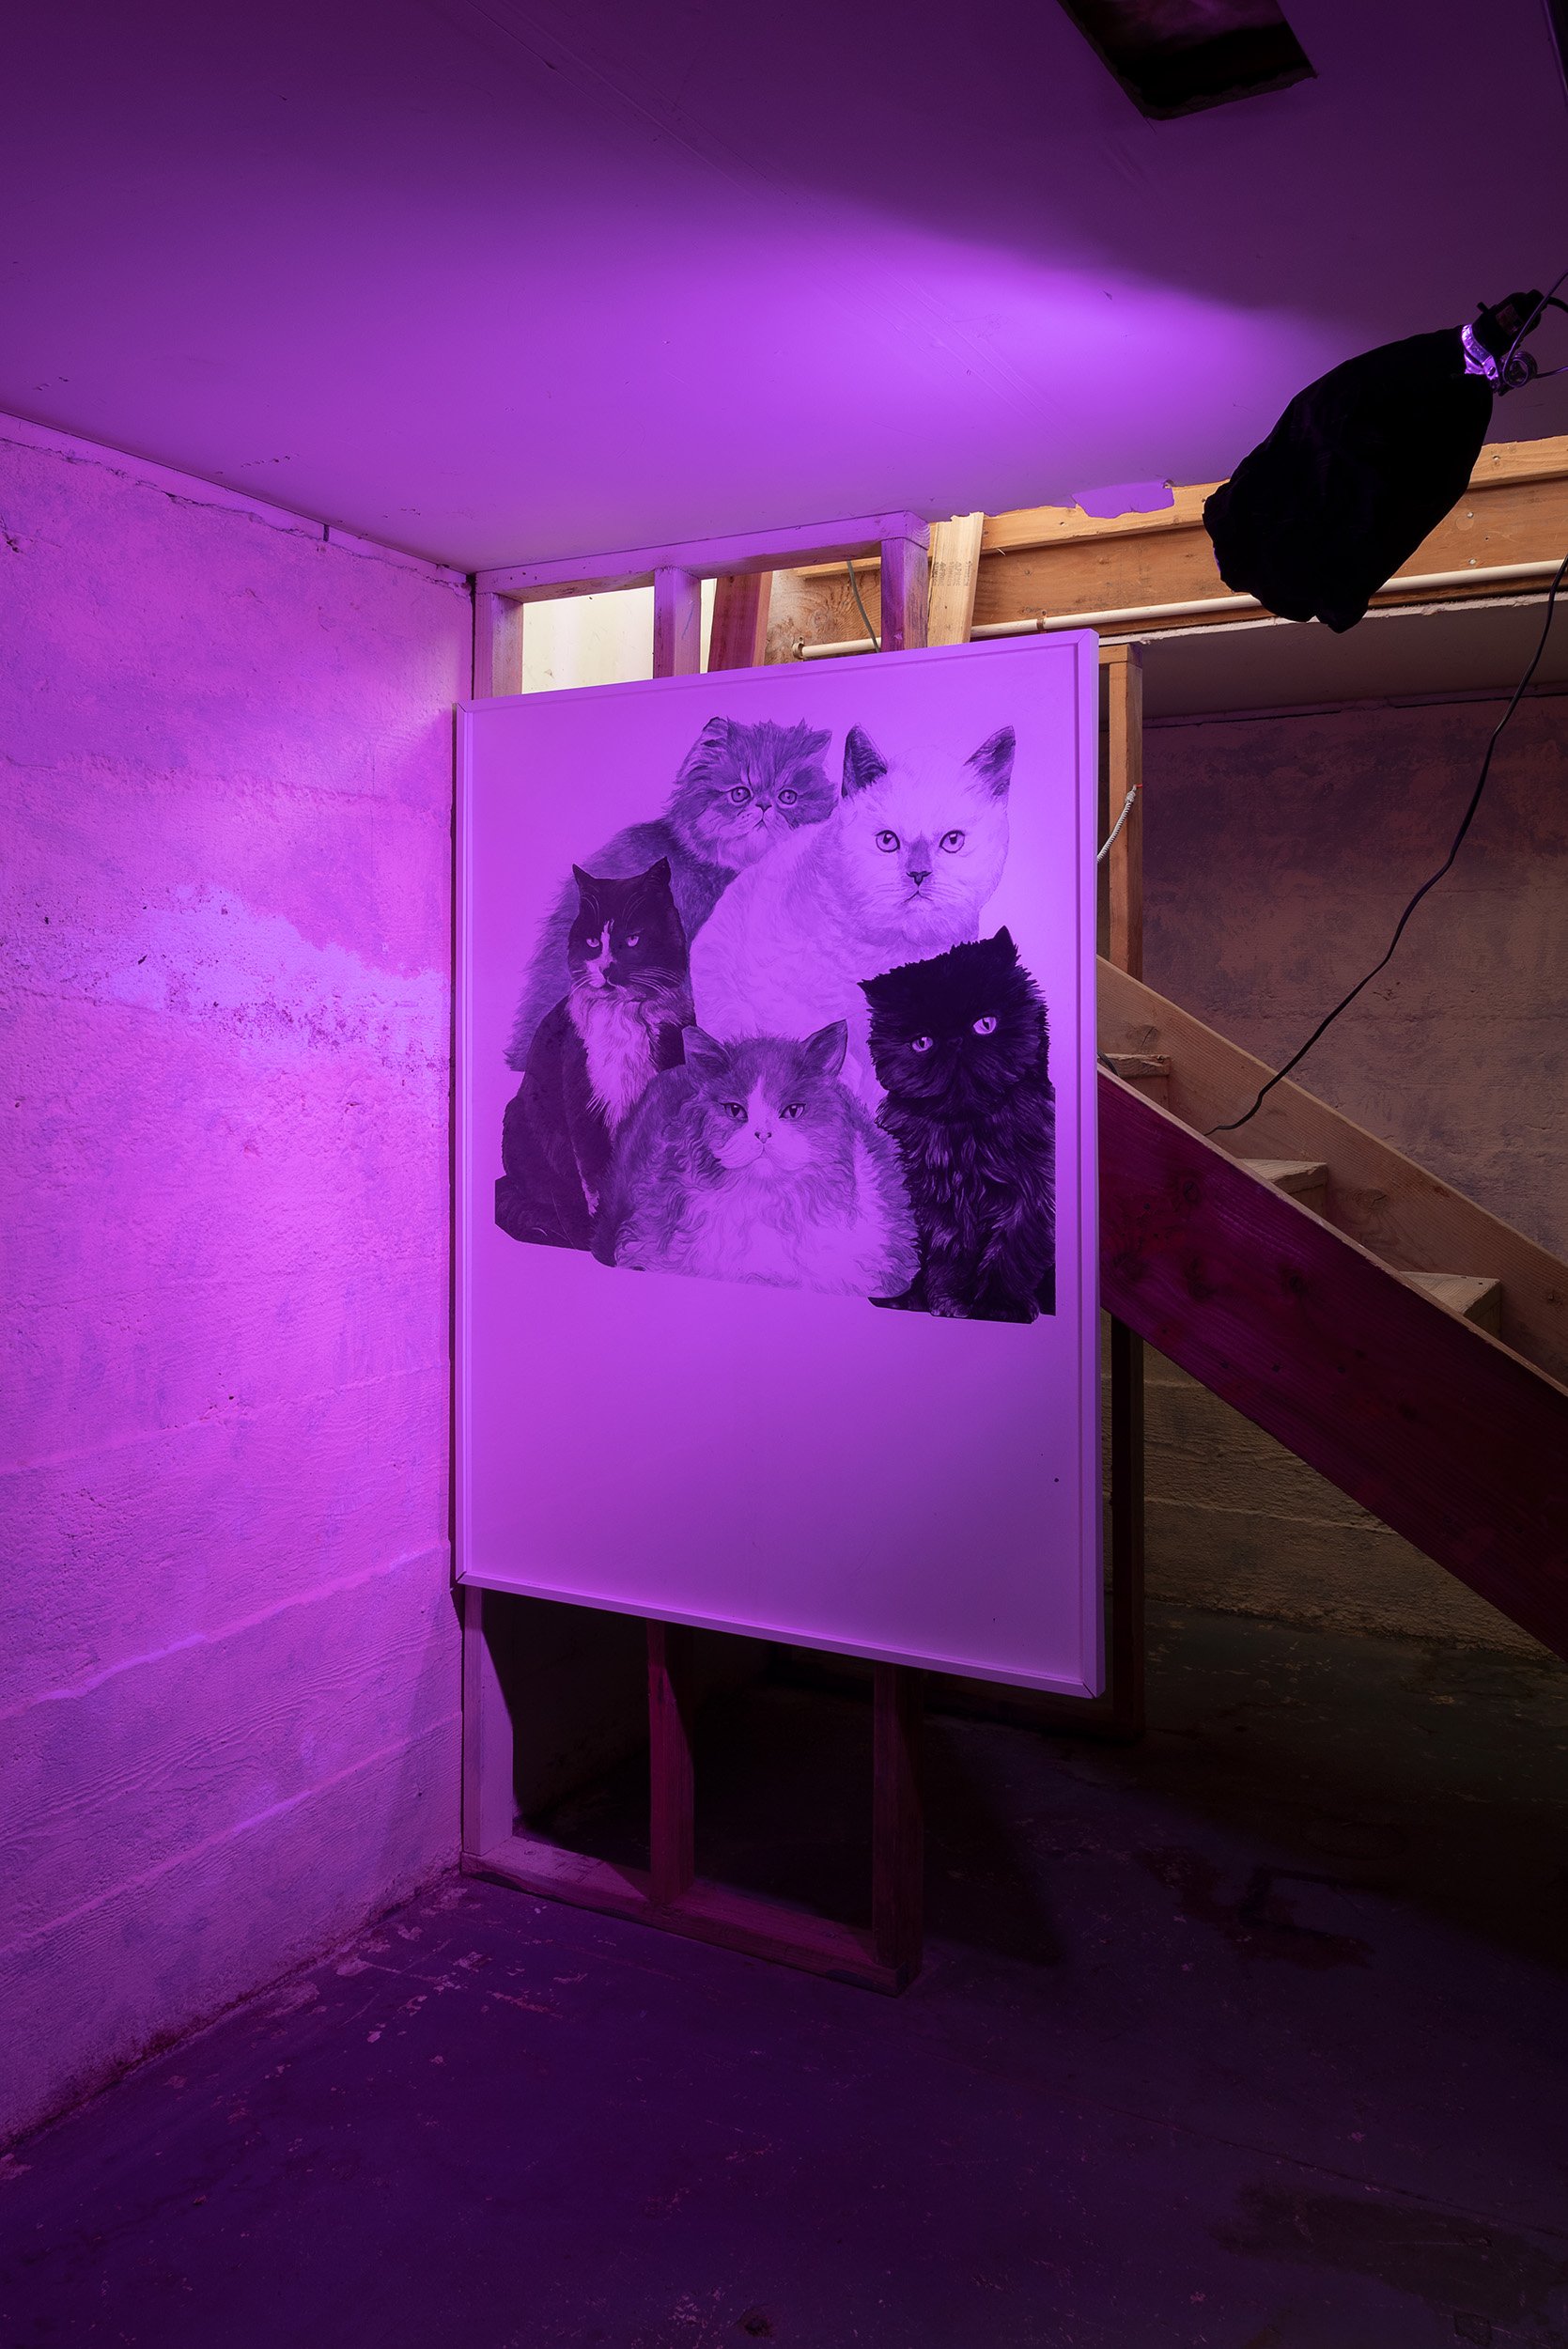  Ryan Hill,  Untitled (Cats) , 2022, installation, ink on paper with pink light bulb, 42 x 56 in. 